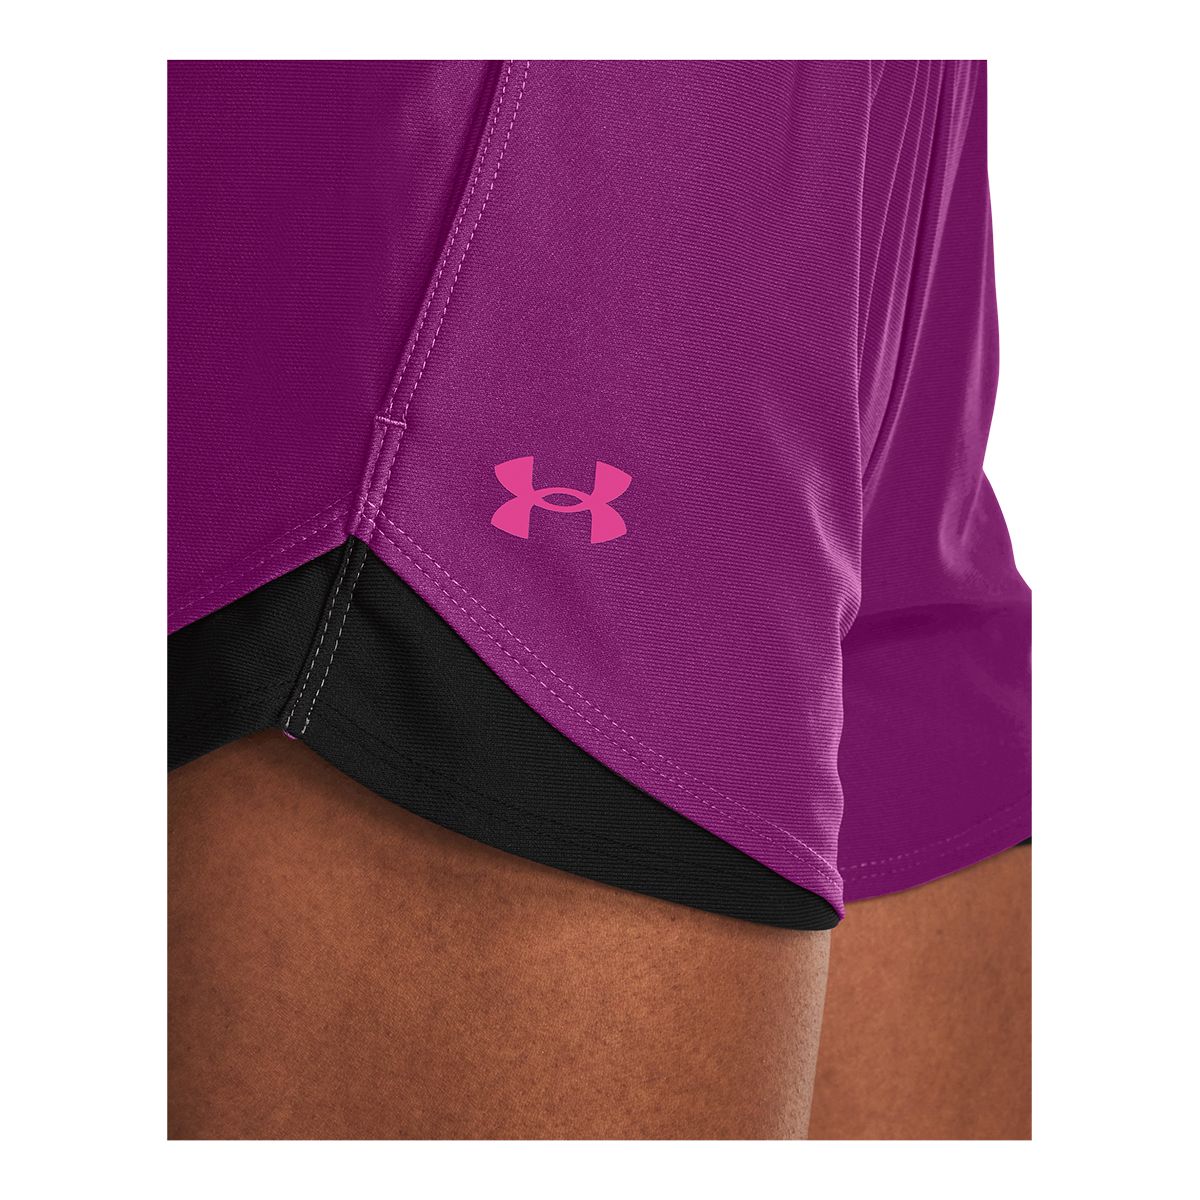 Under Armour Women's Play Up 2.0 Shorts Mobile Blue Black XX-Large